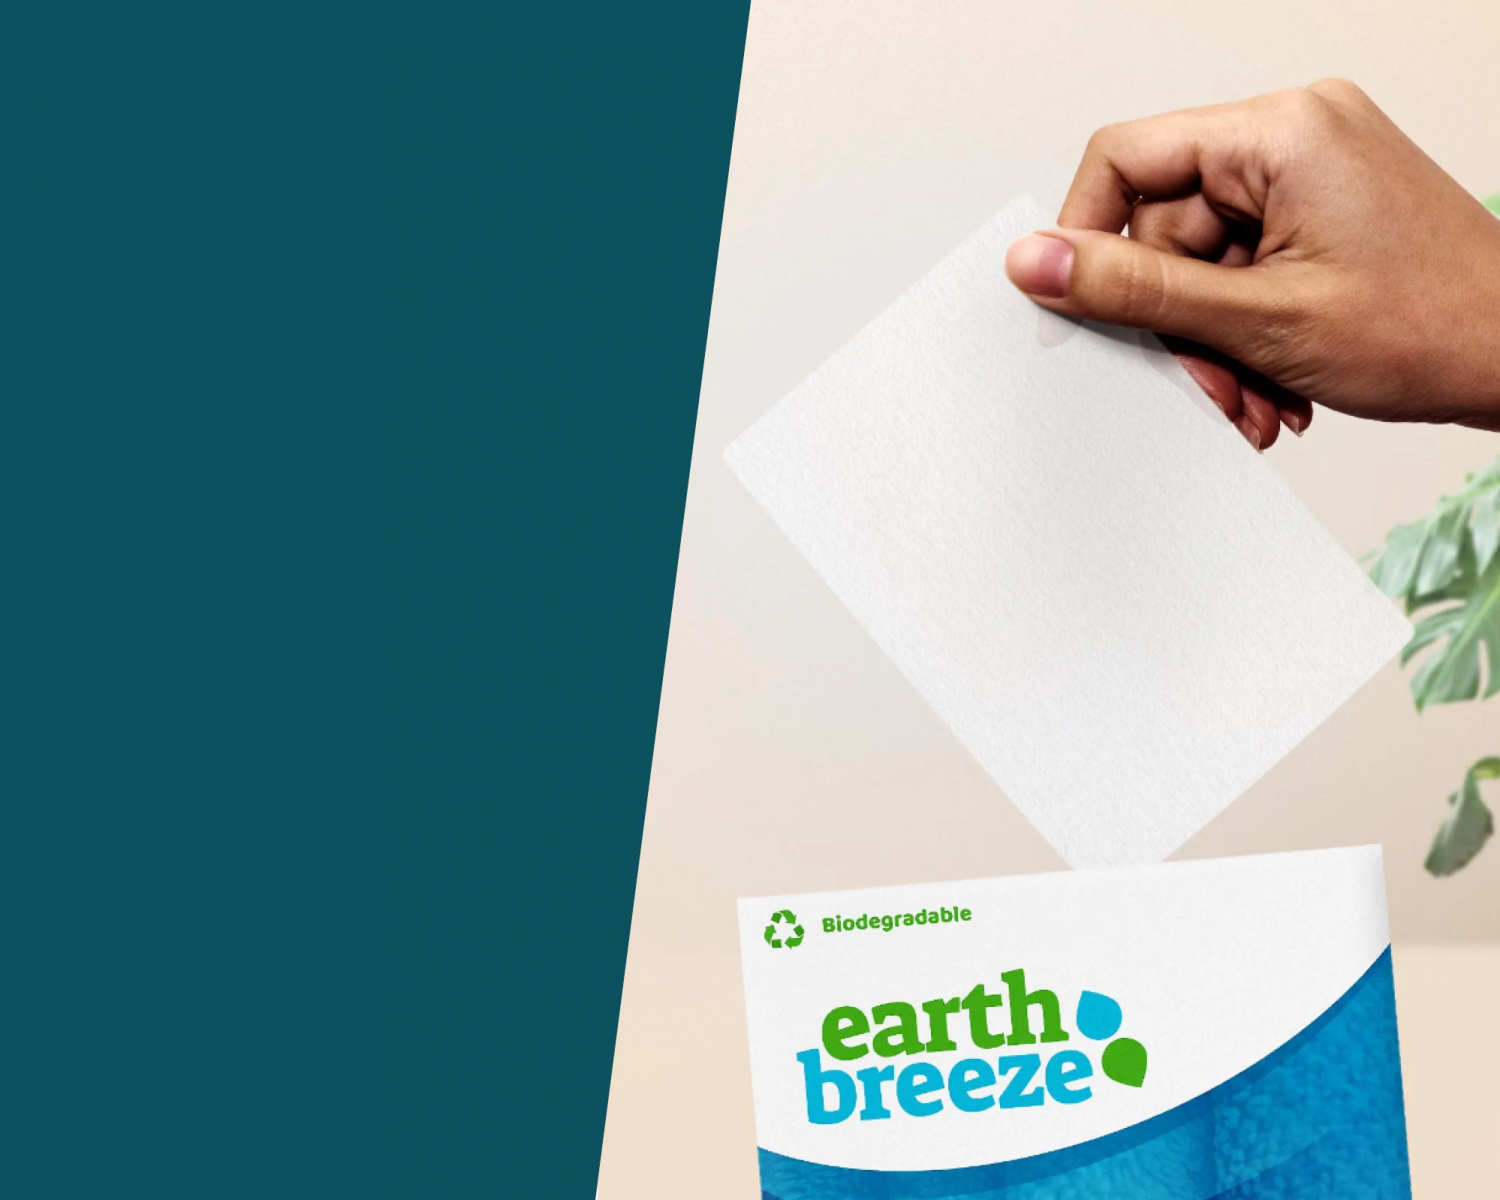 Our Favourite Eco Finds Worth Sharing #1 - Earth Breeze Laundry Sheets